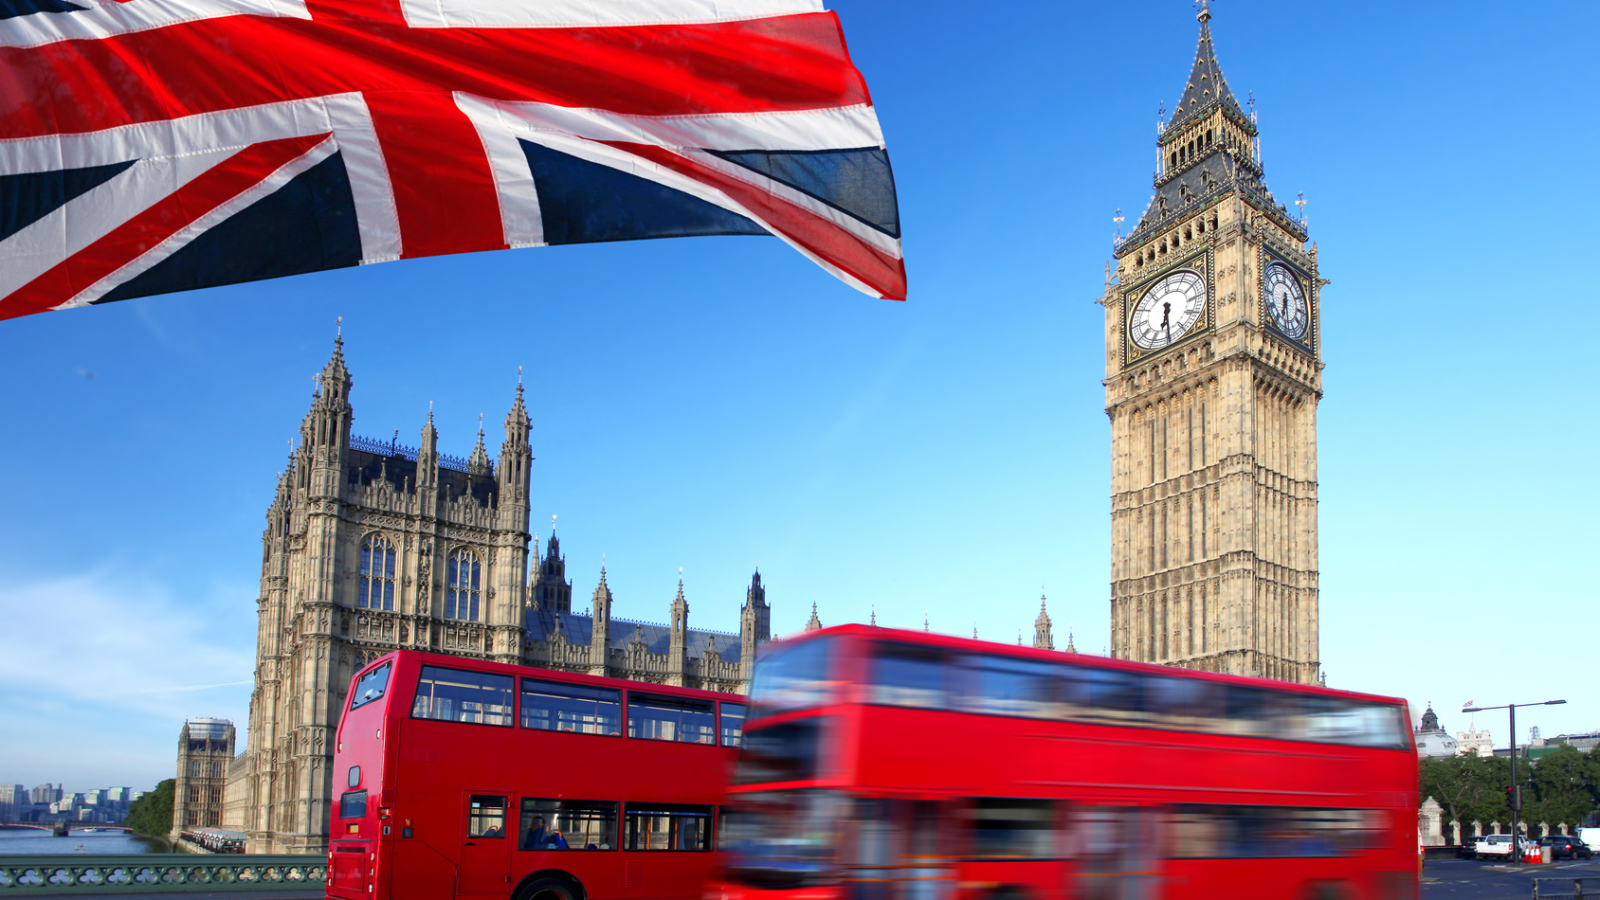 Big Ben with city bus and flag of England, London